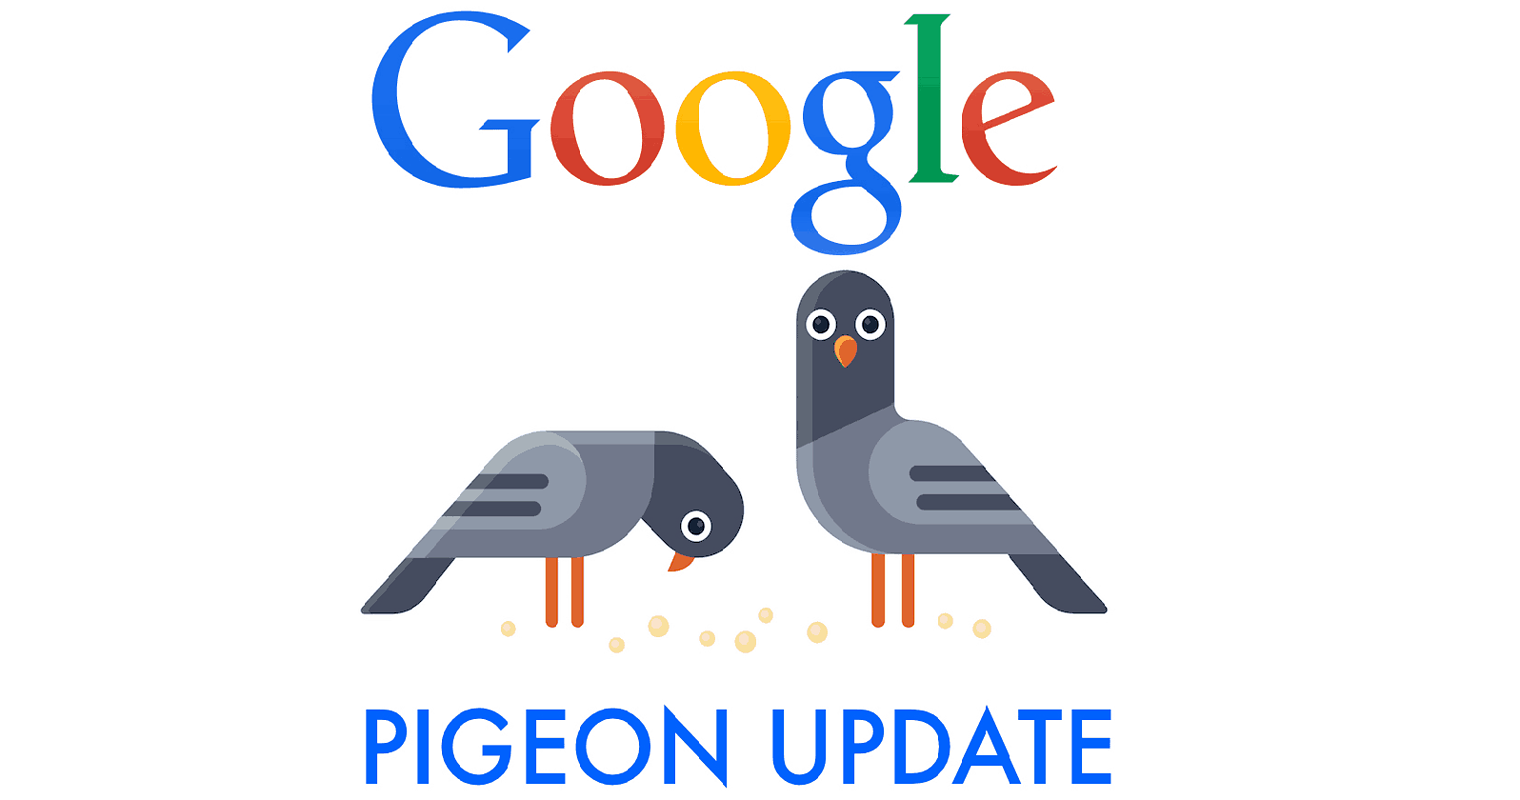 How the Google Pigeon Update Changed Local Search Results